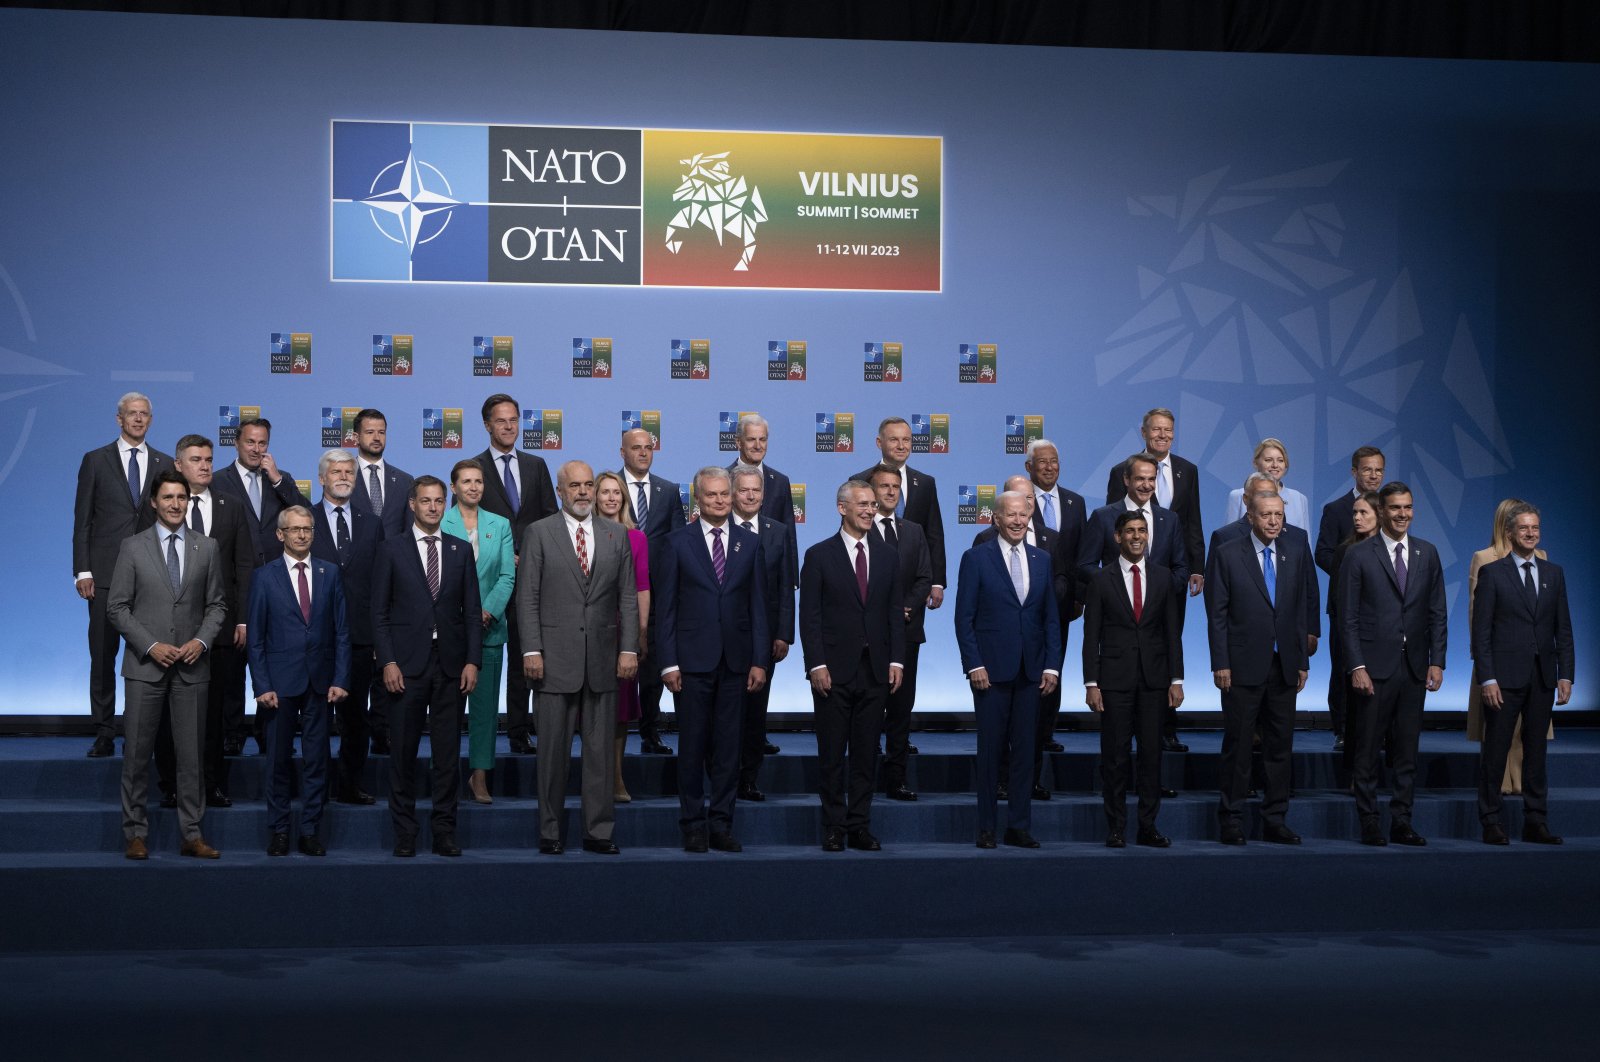 Heads of States and Governments along with NATO Secretary-General Jens Stoltenberg (front row, 6-L) pose for the official group photo at the NATO summit in Vilnius, Lithuania, July 11, 2023. (AP Photo)